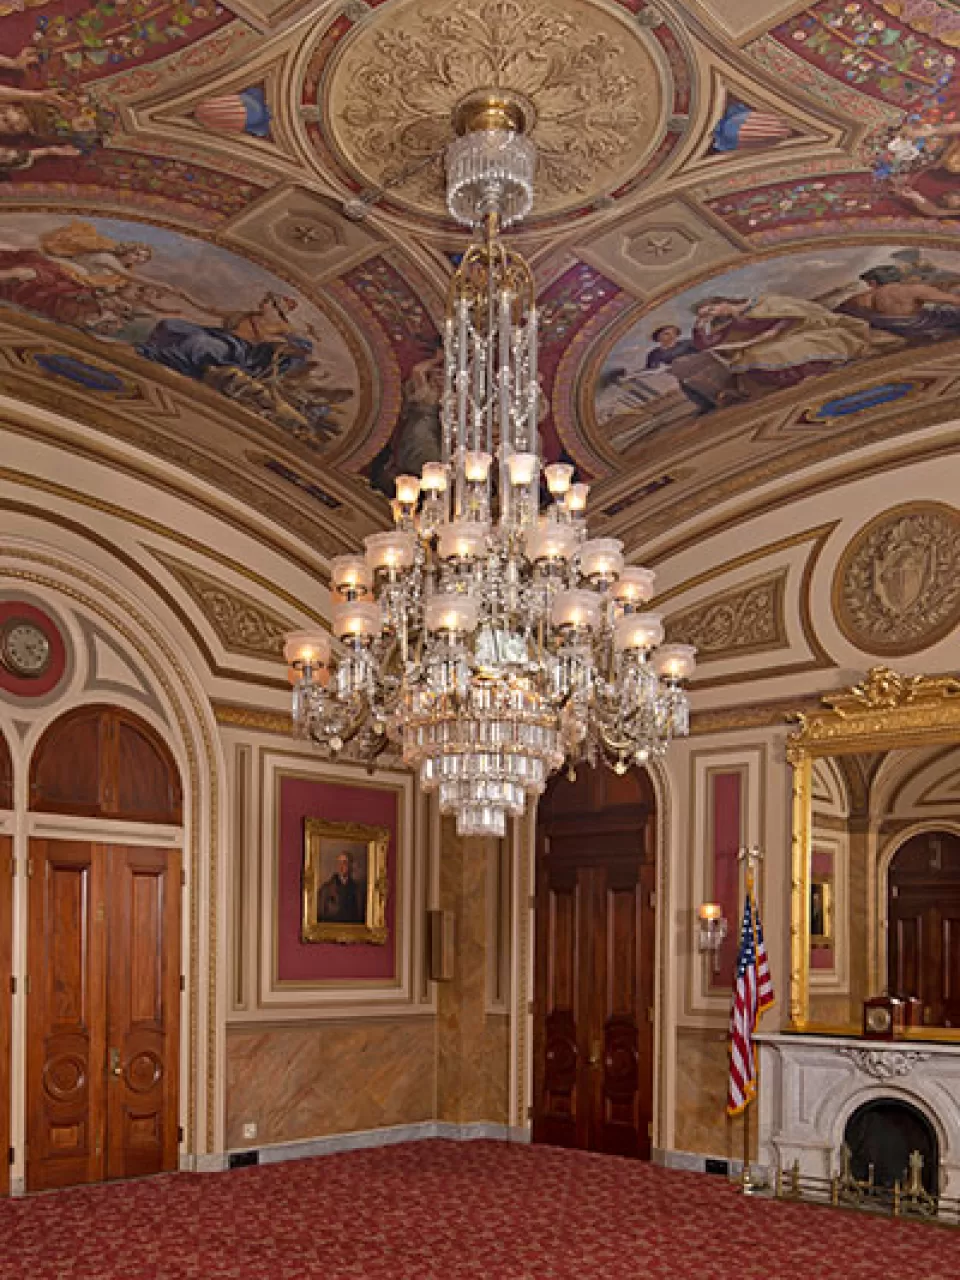 Room S-211 of the U.S. Capitol, also known as the Lyndon B. Johnson Room.